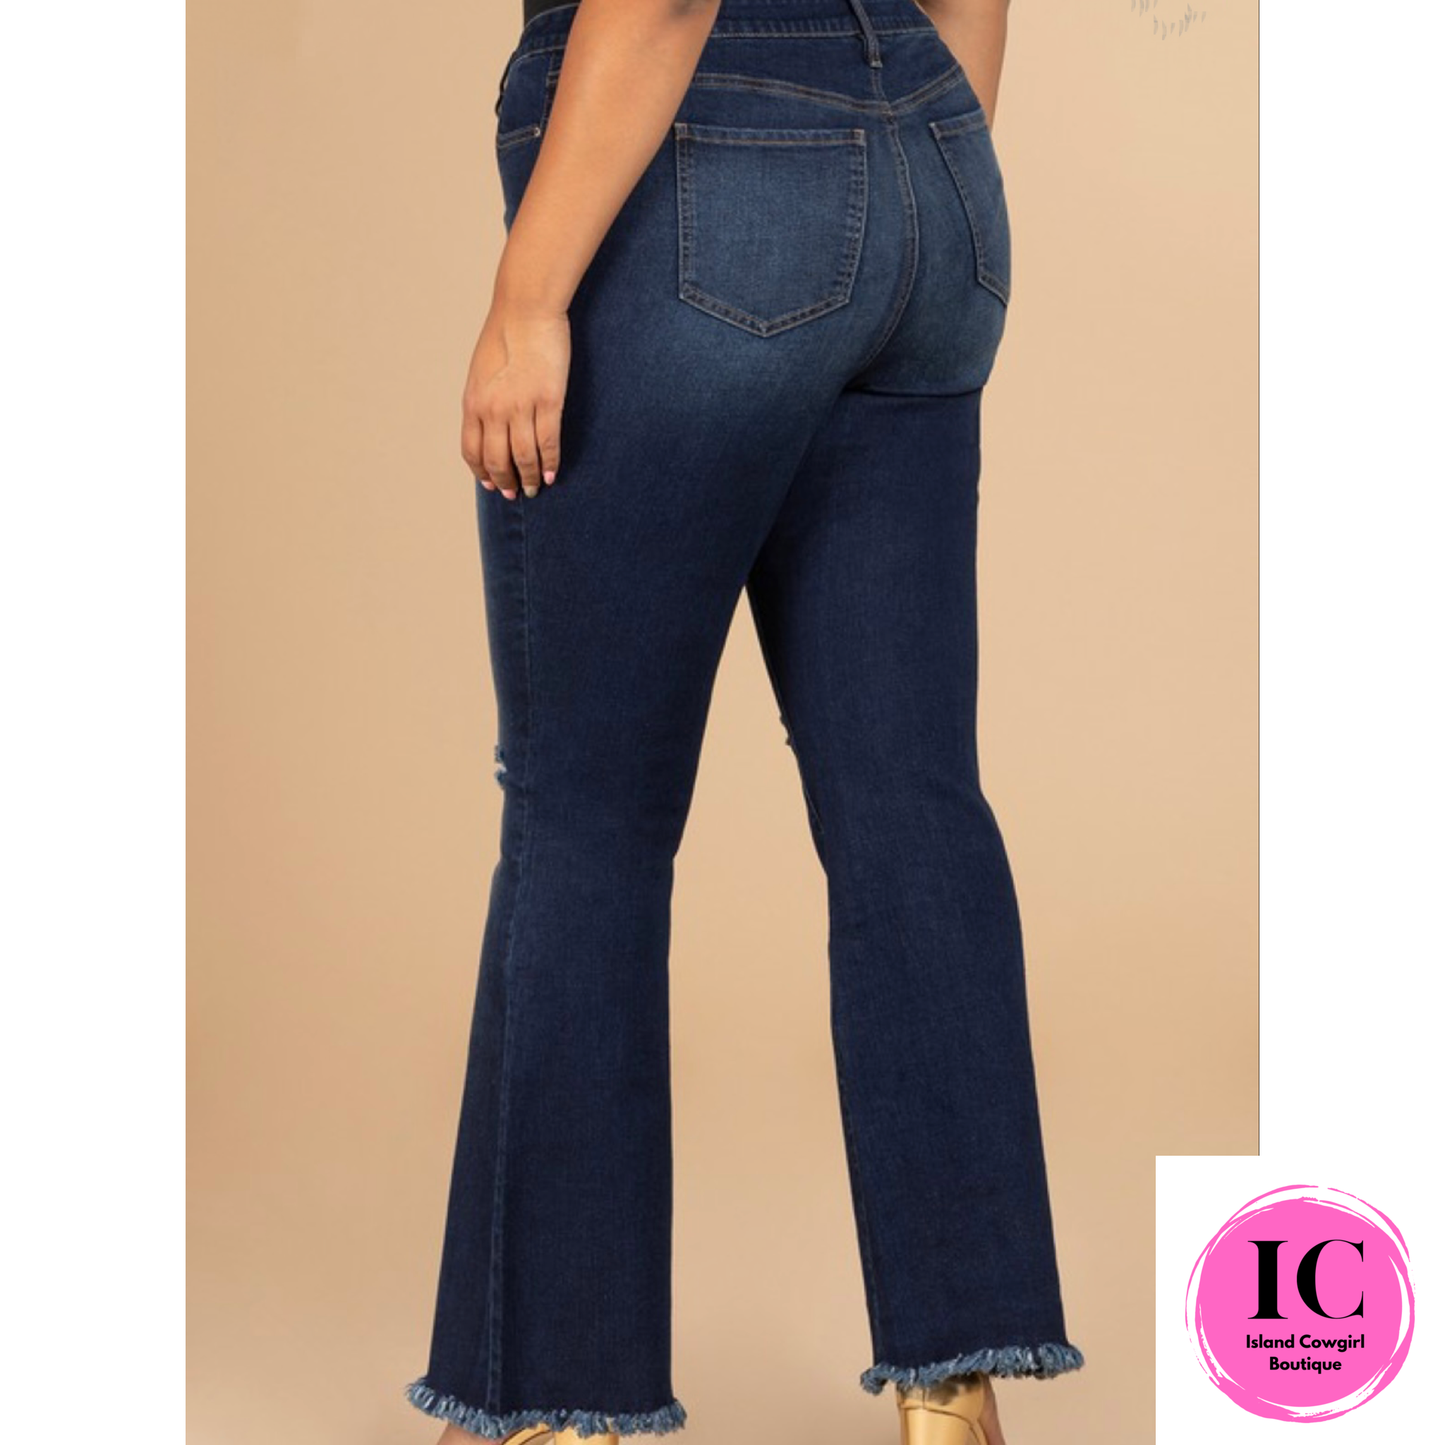 Curvy Girl Can't Forget This Dark Wash Flare Jeans